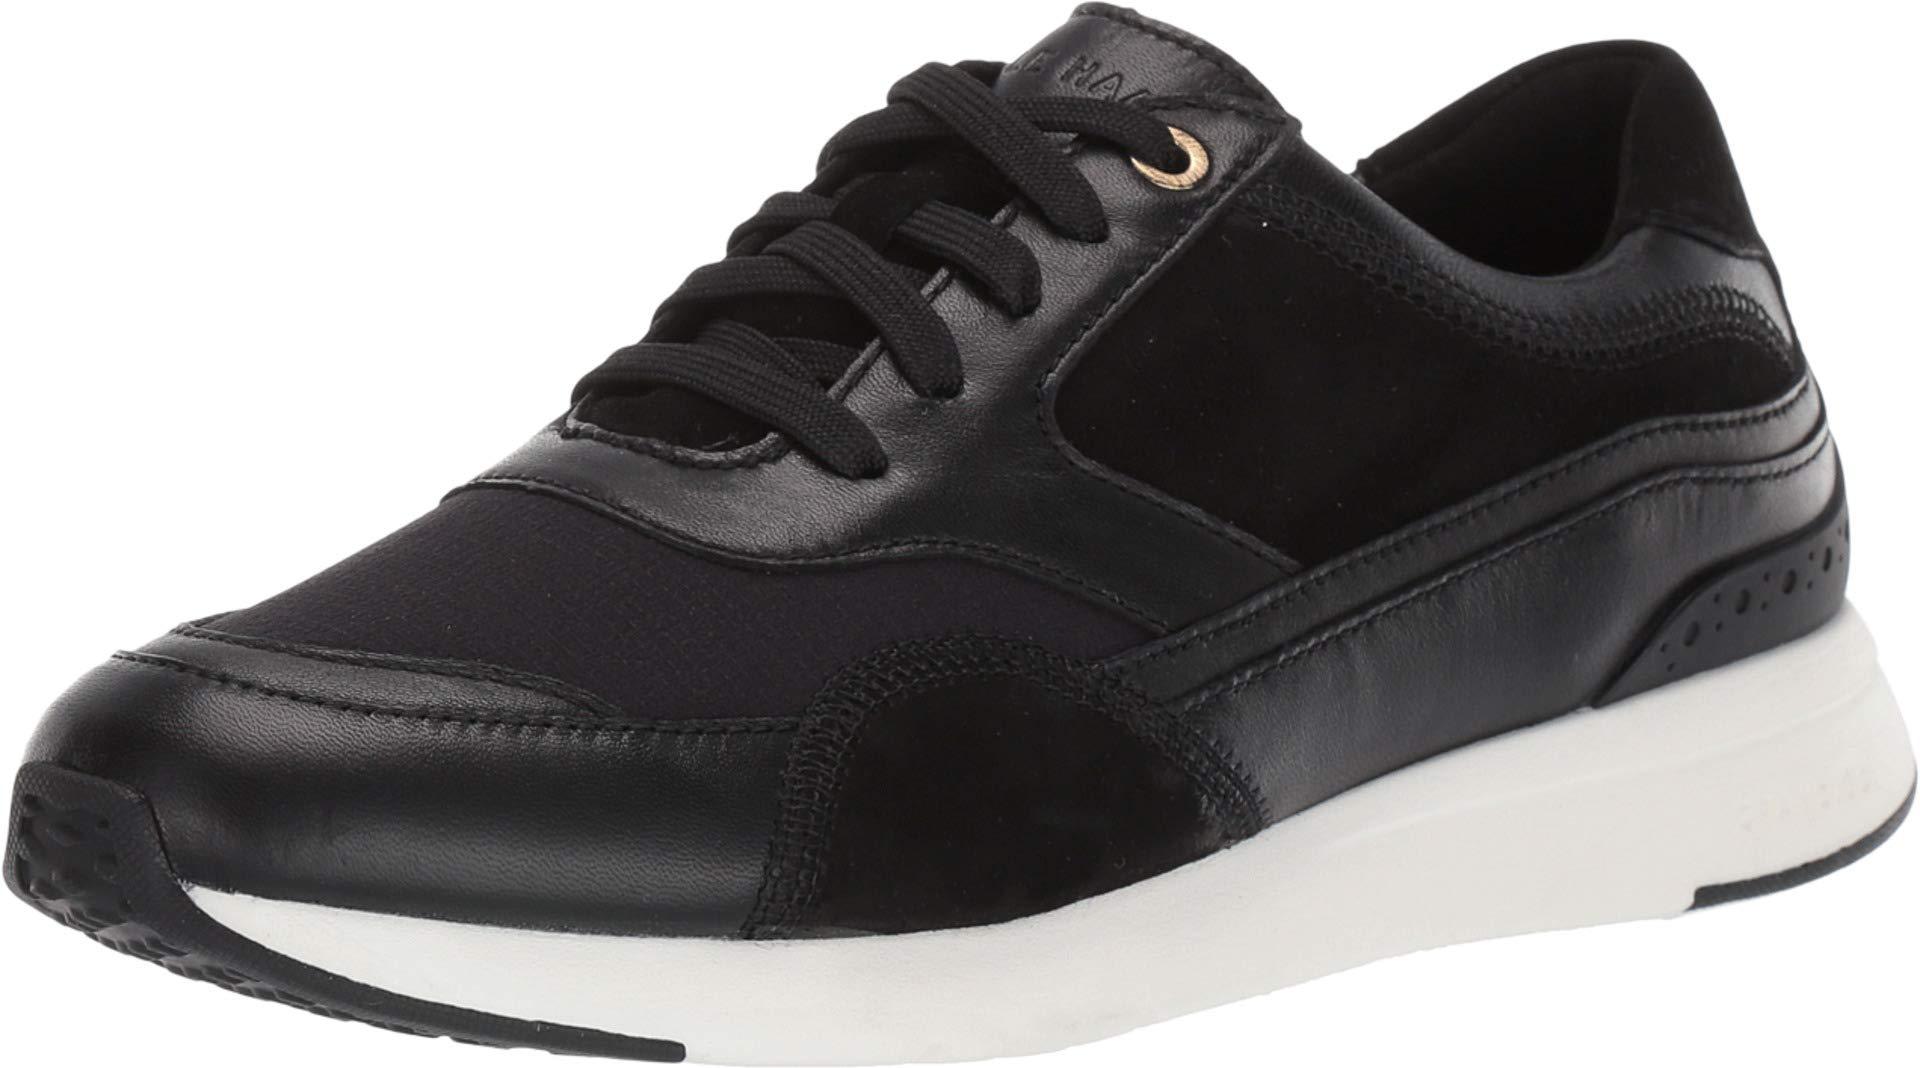 Cole Haan Leather Grandpro Downtown Runner in Black - Lyst